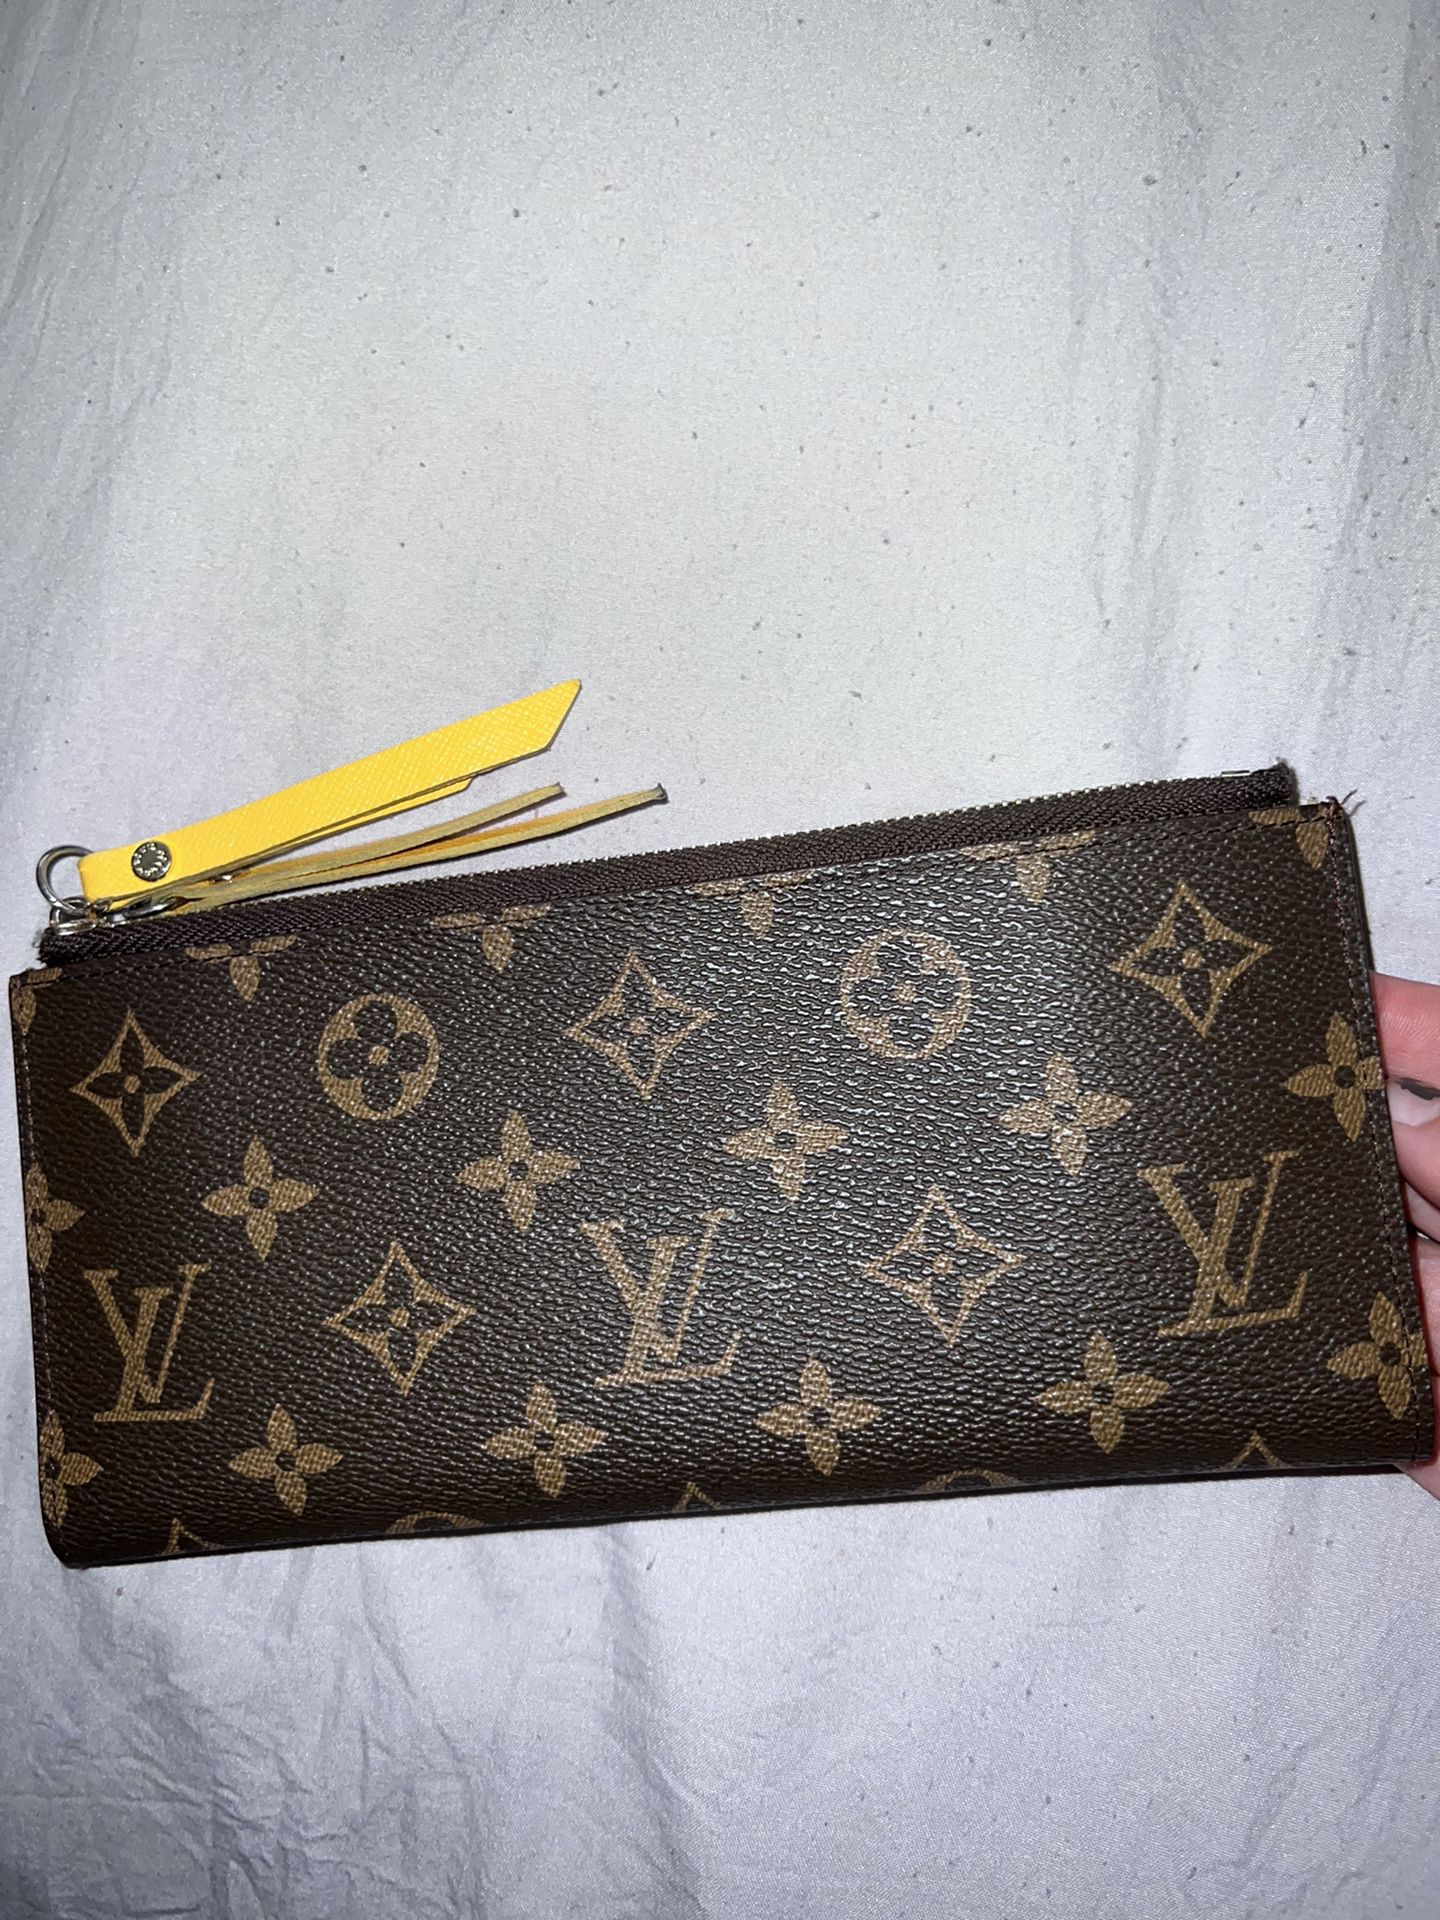 Louis Vuitton Monogram Adele Wallet for Sale in Colton, CA - OfferUp